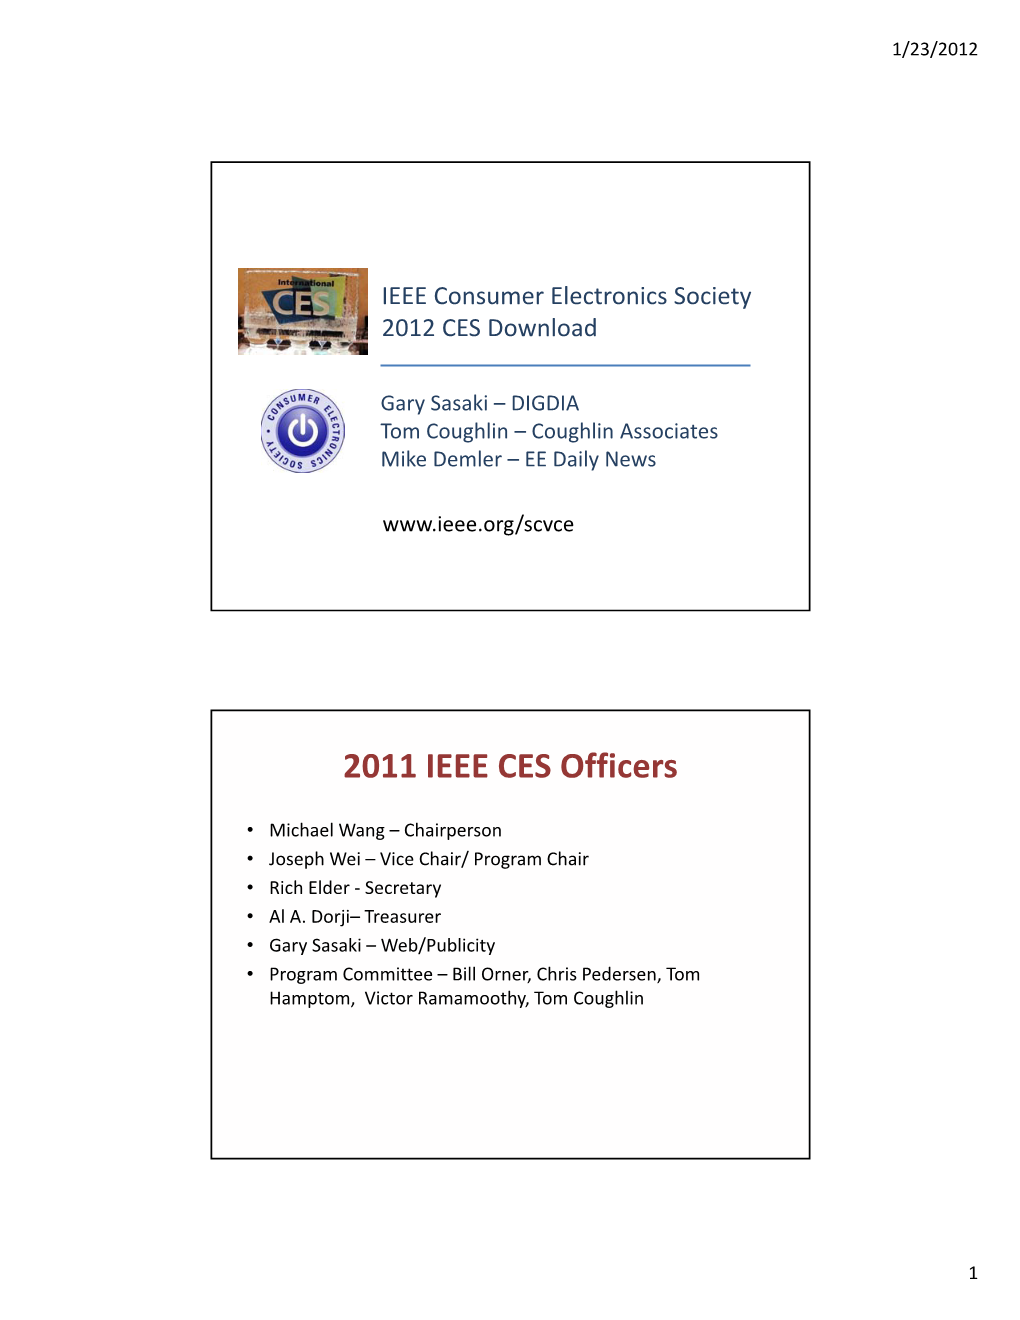 2011 IEEE CES Officers